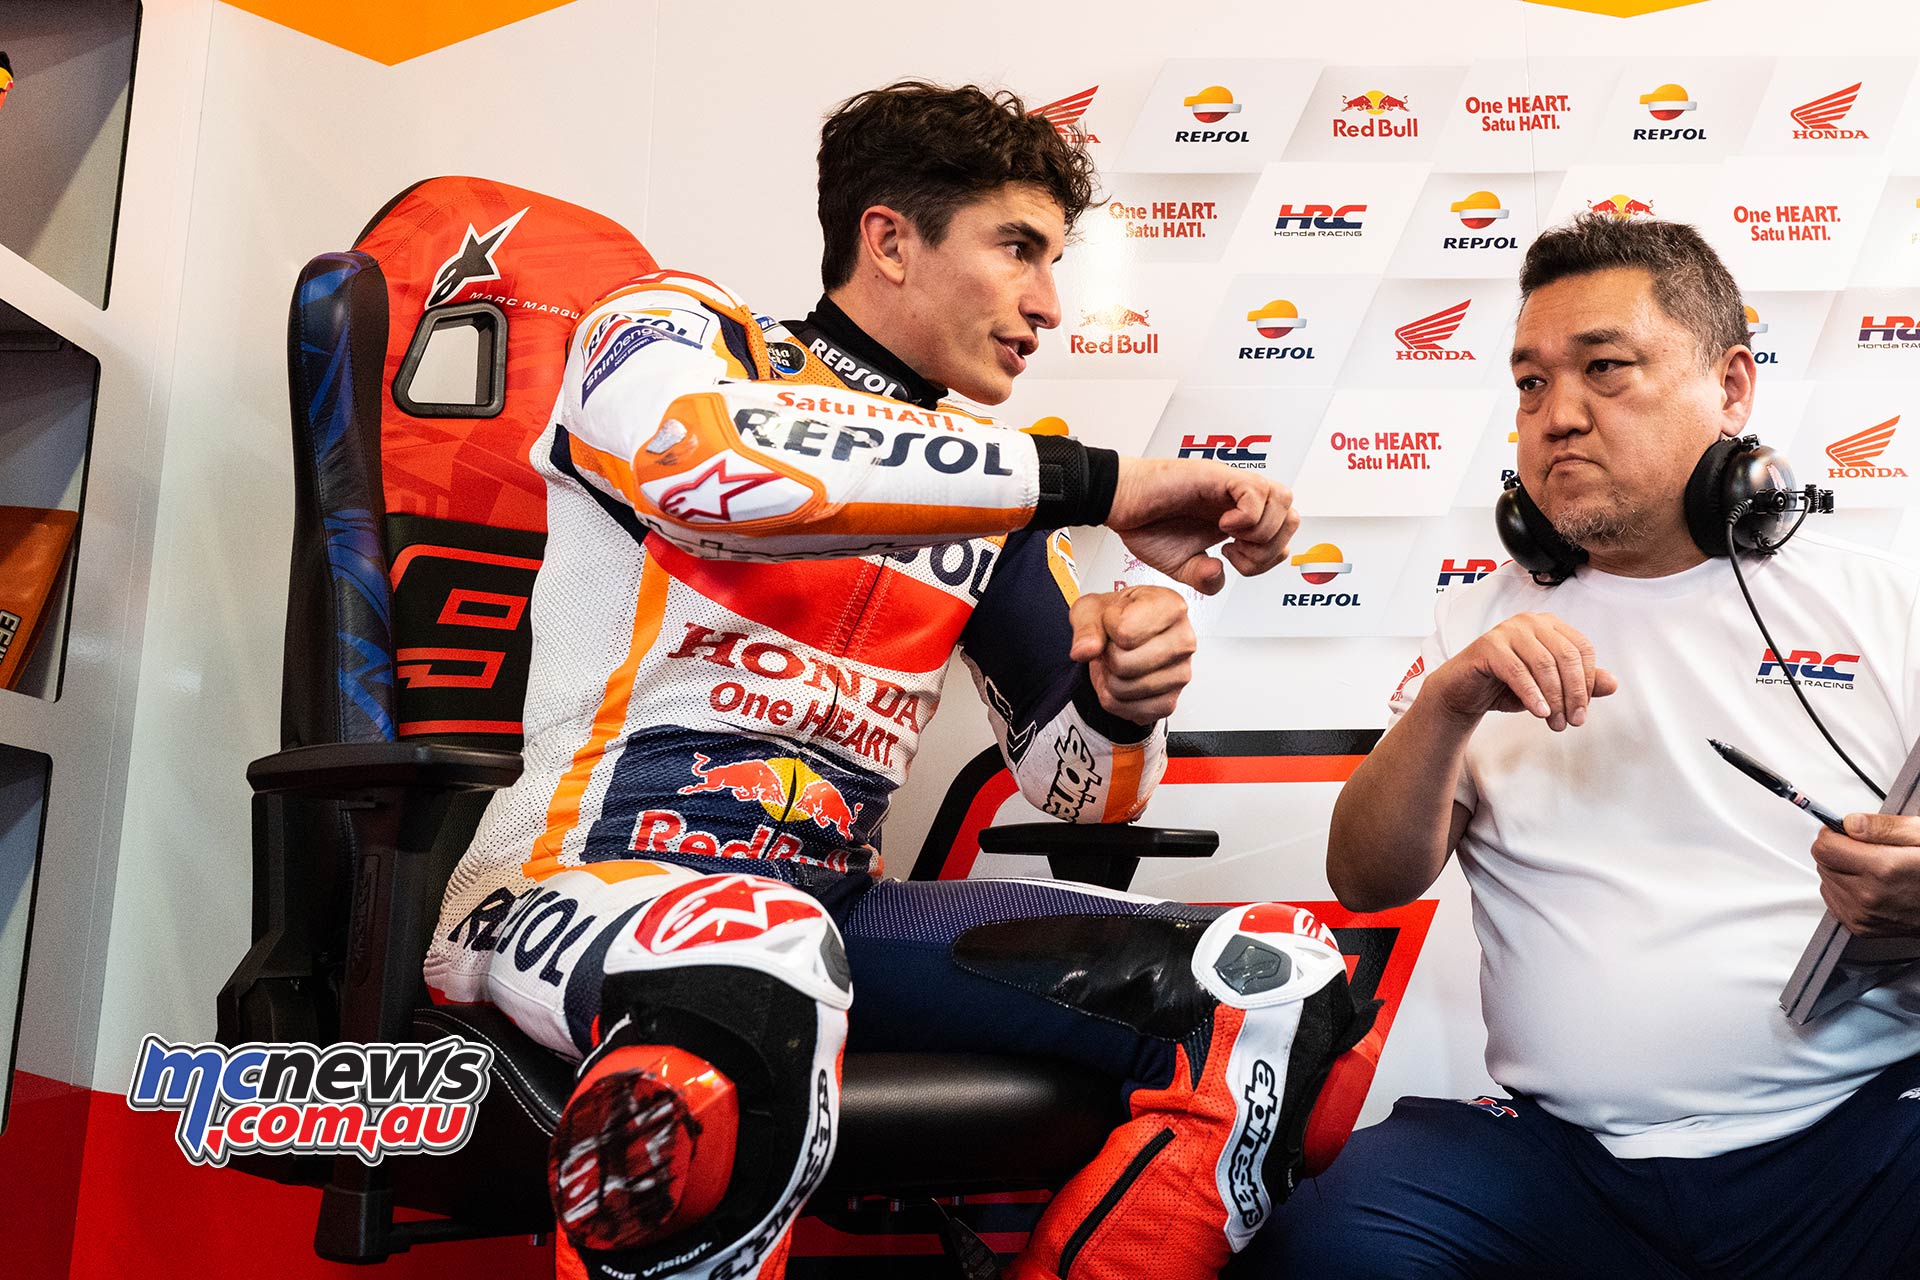 Video: Marc Márquez in action at the Portimão tests - Motorcycle Sports